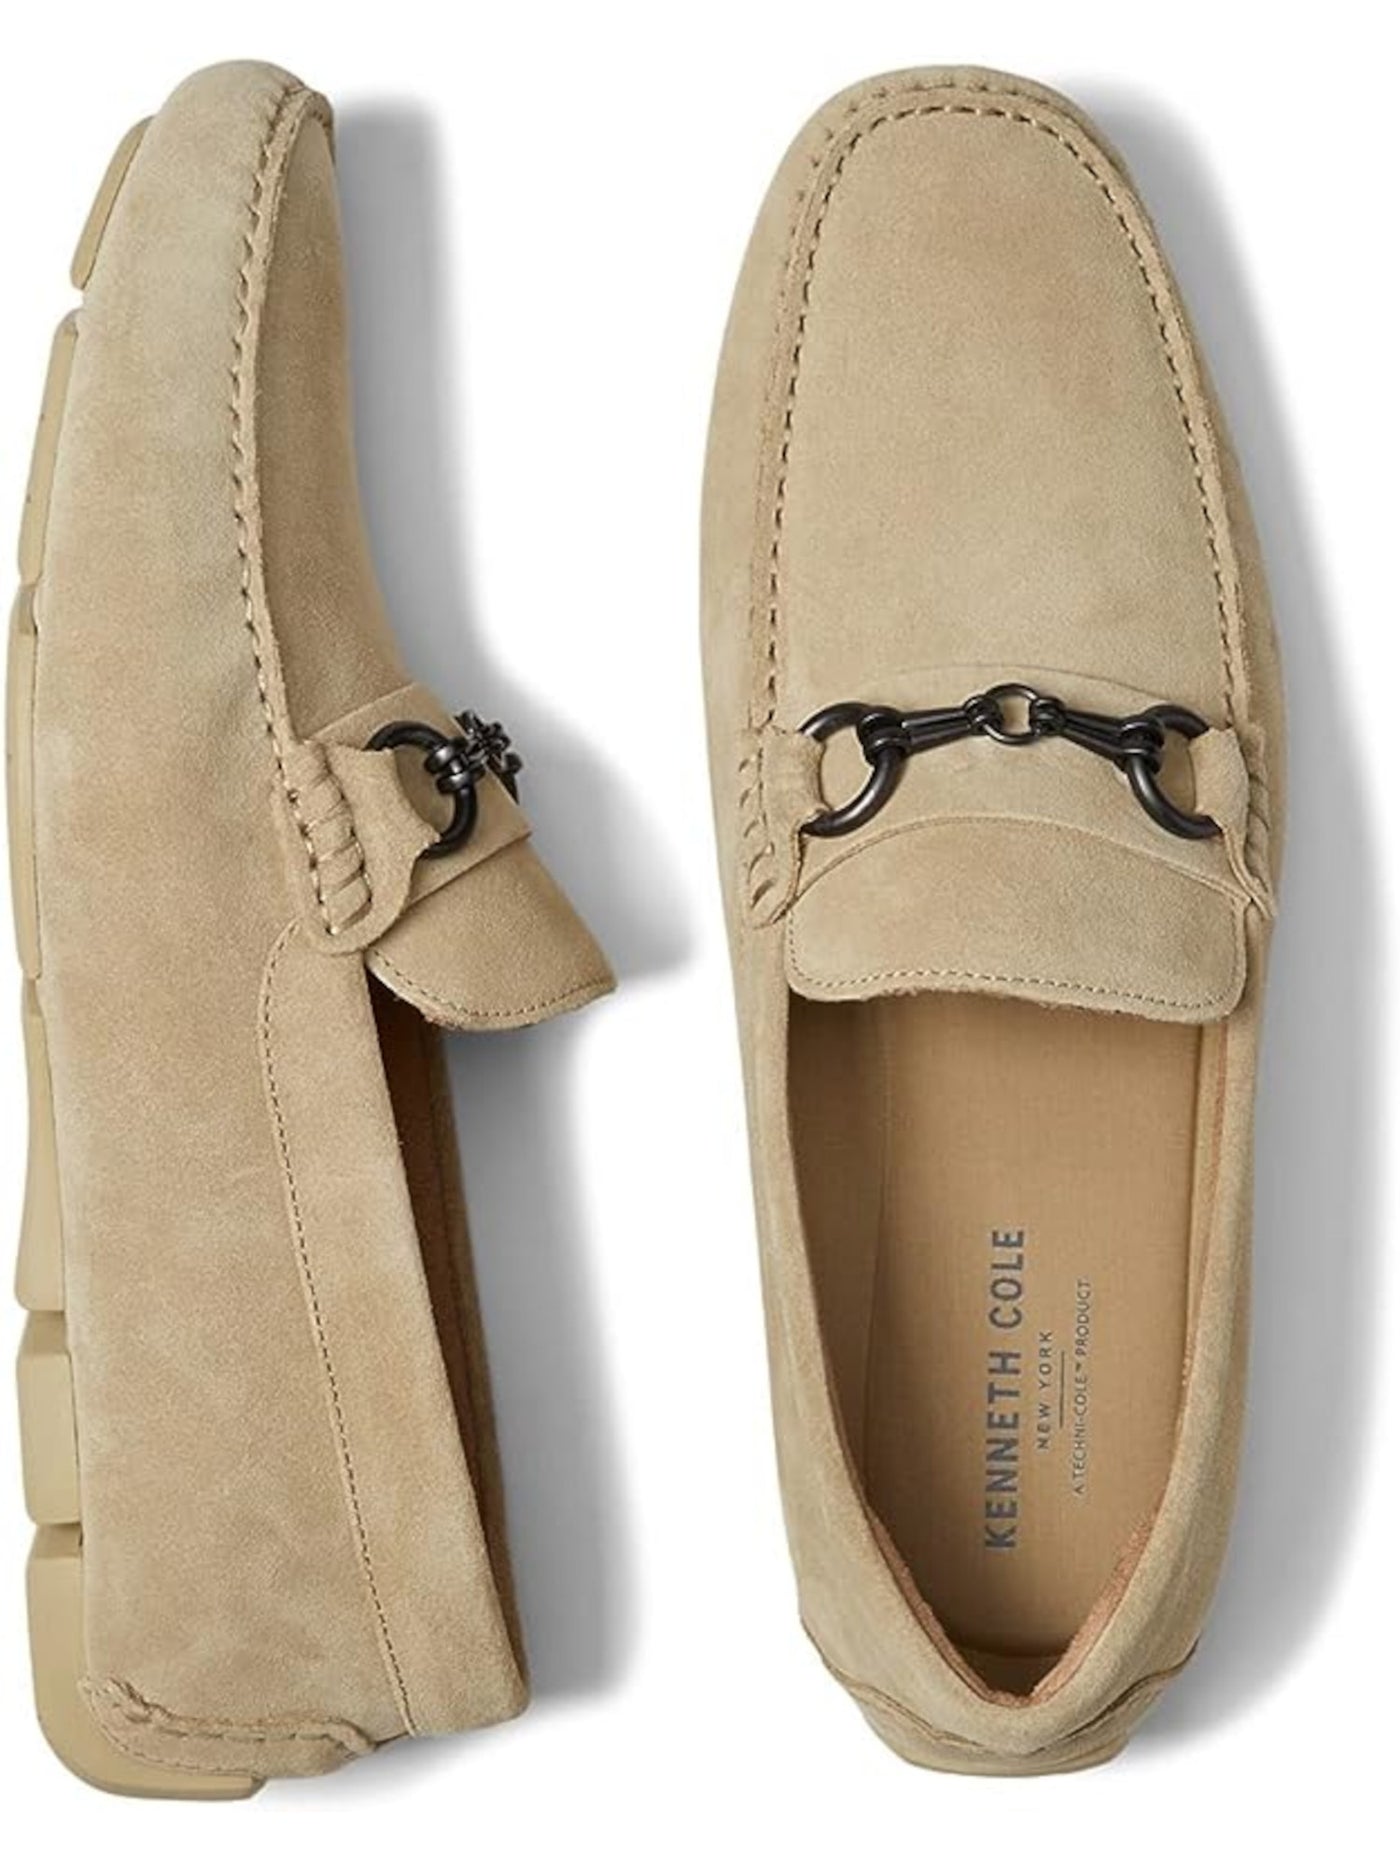 KENNETH COLE NEW YORK Mens Beige Bit Detail Hardware Topstitch Cushioned Removable Insole Theme Square Toe Slip On Leather Loafers Shoes 9.5